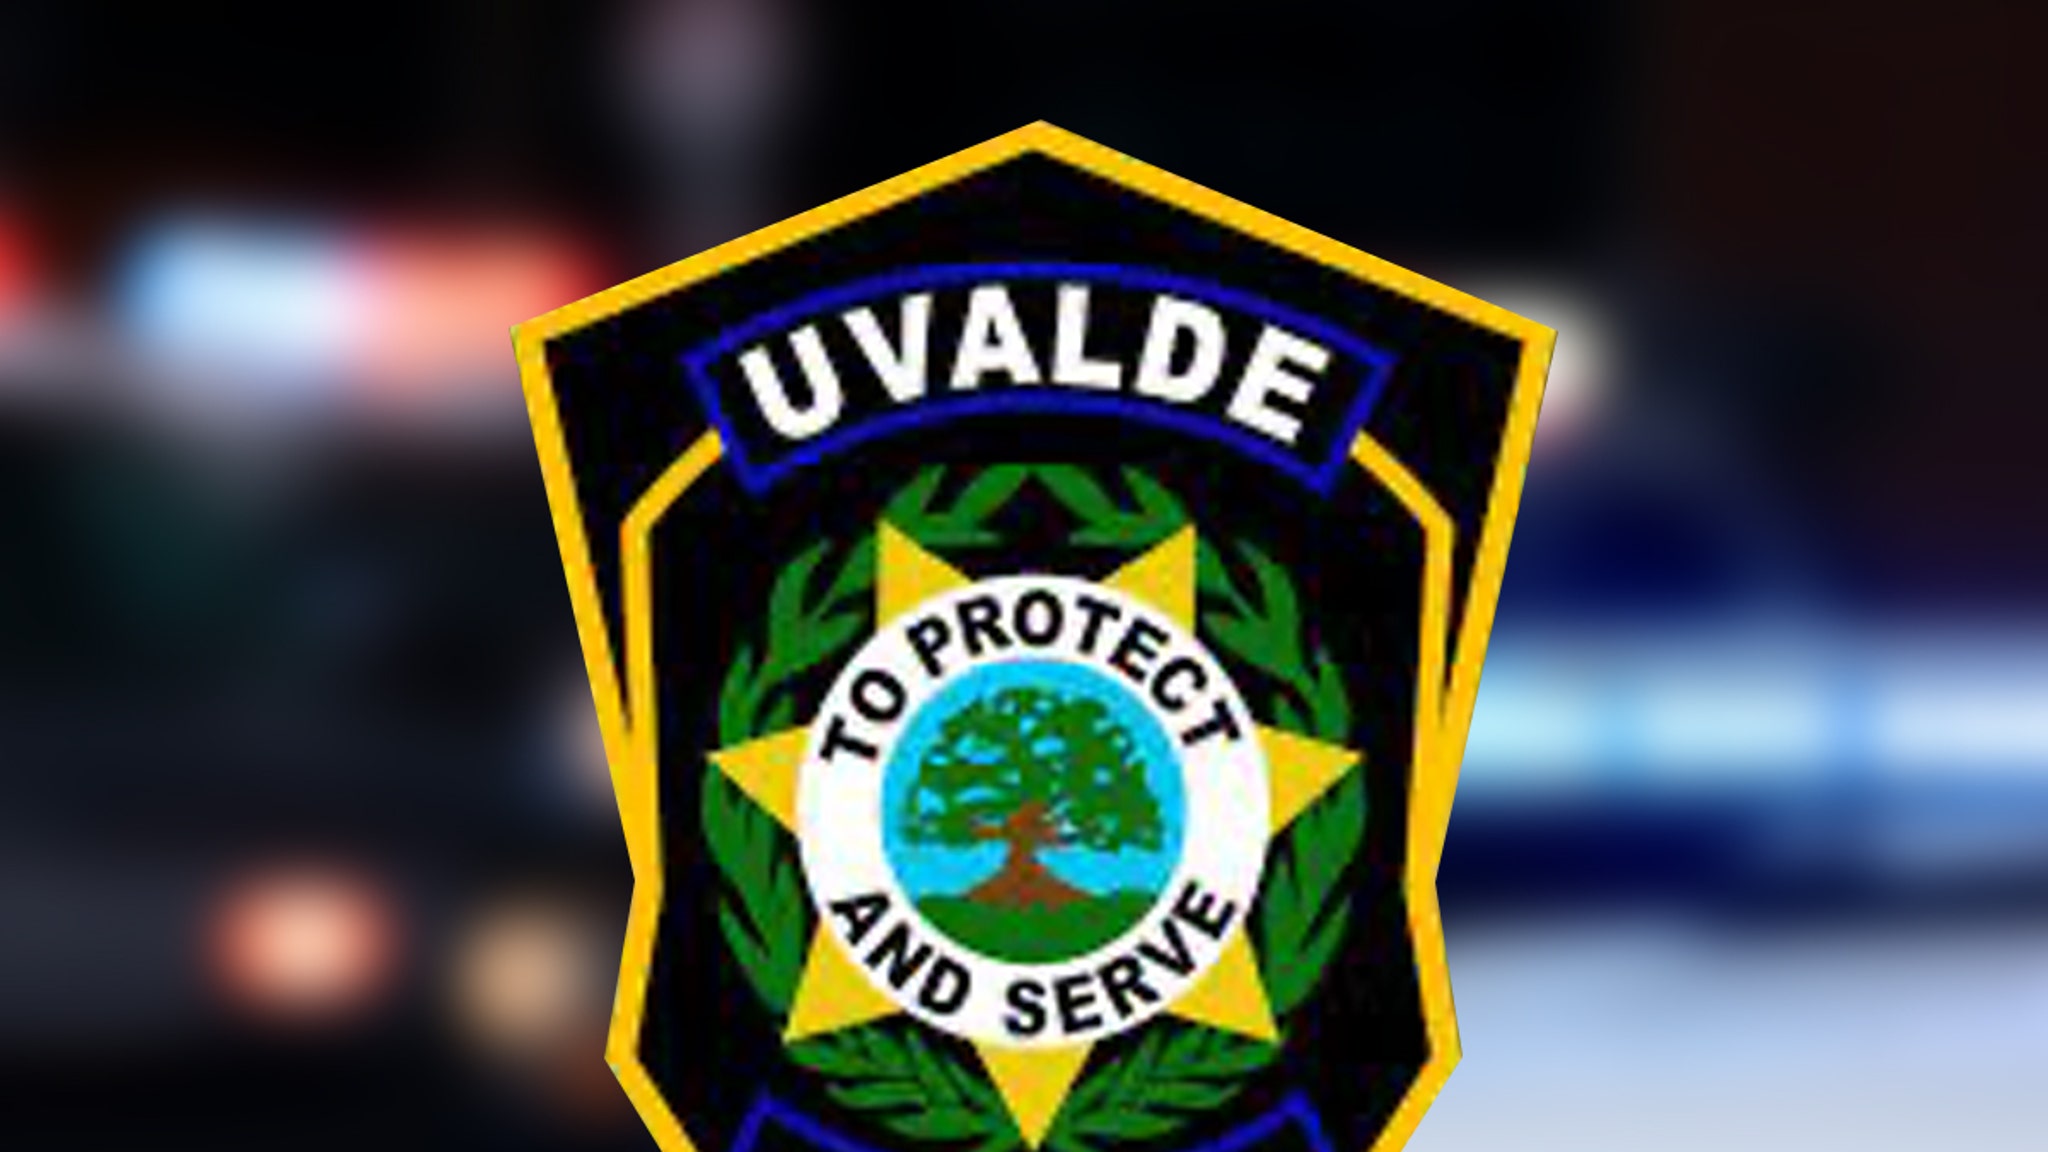 Uvalde police investigate shooting, two people injured, two suspects free